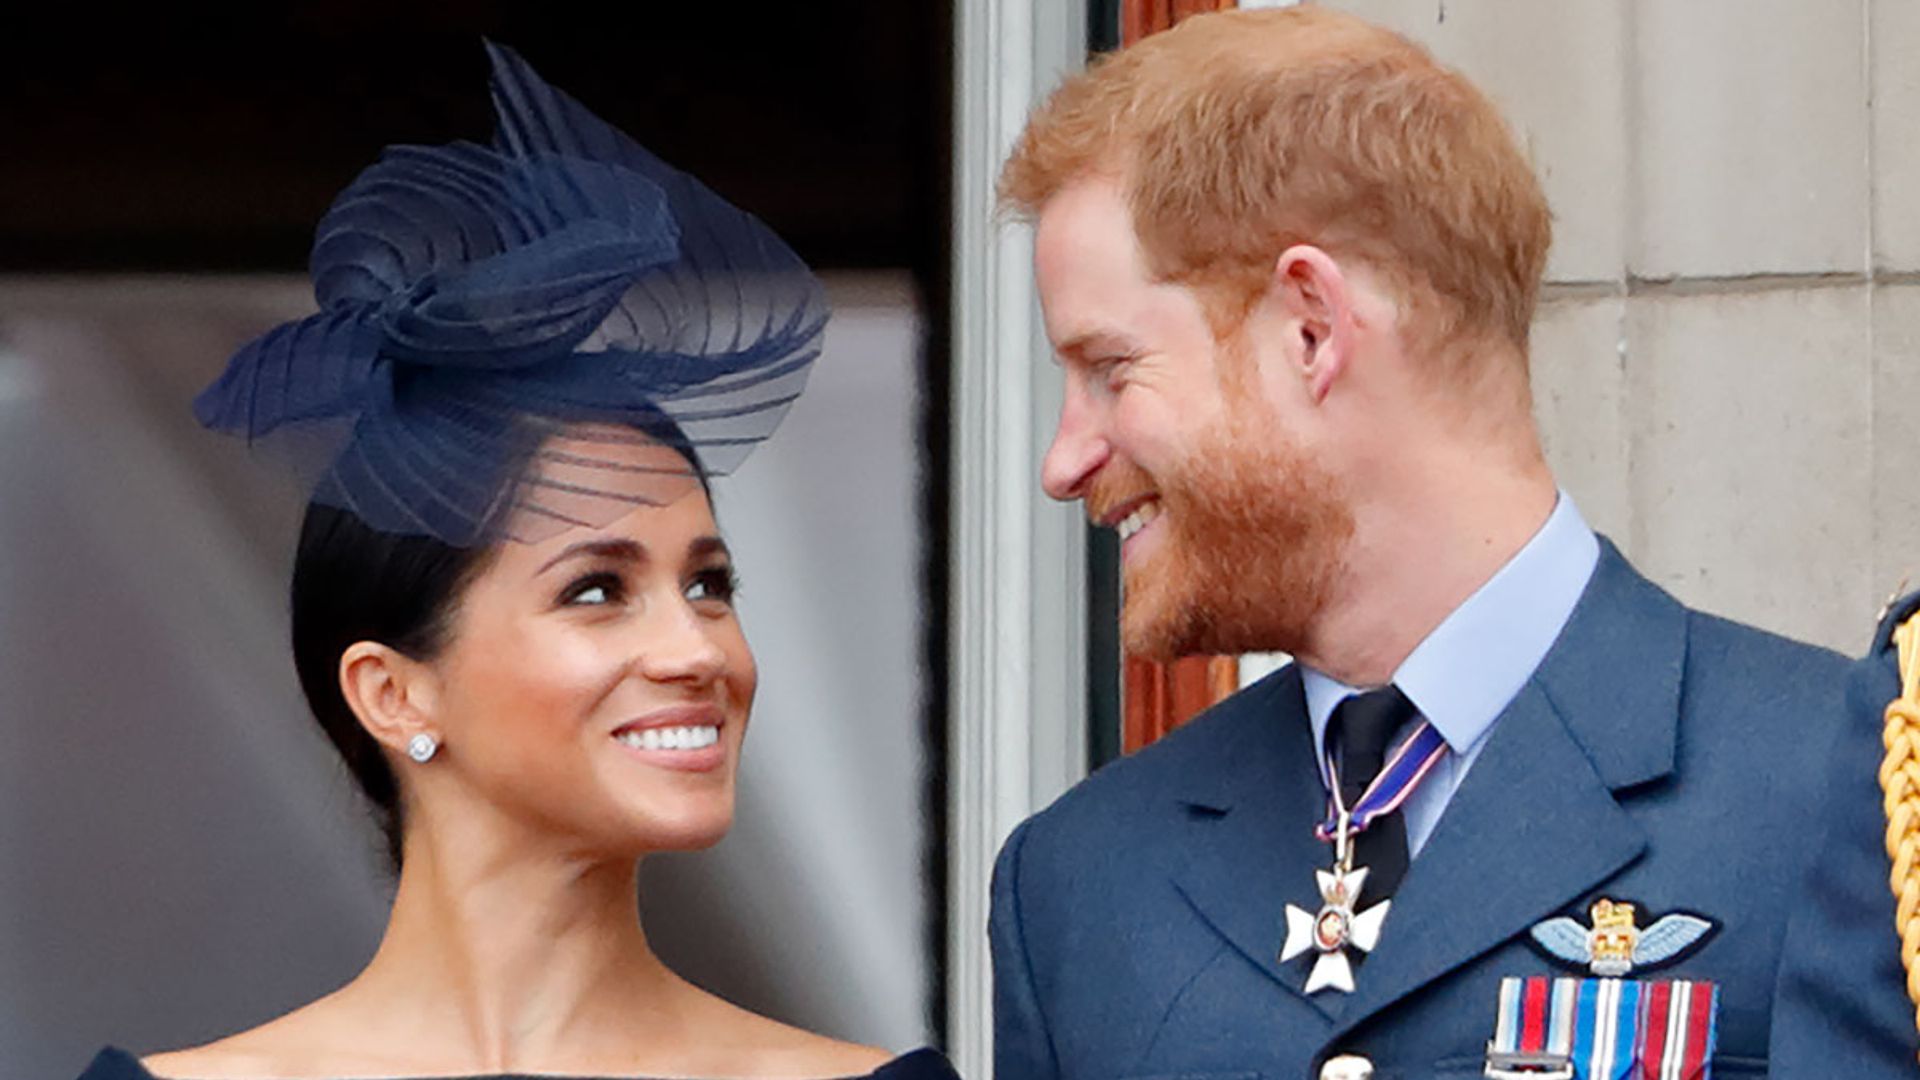 Meghan Markle and Prince Harry's Oprah interview receives Emmy nomination – reactions